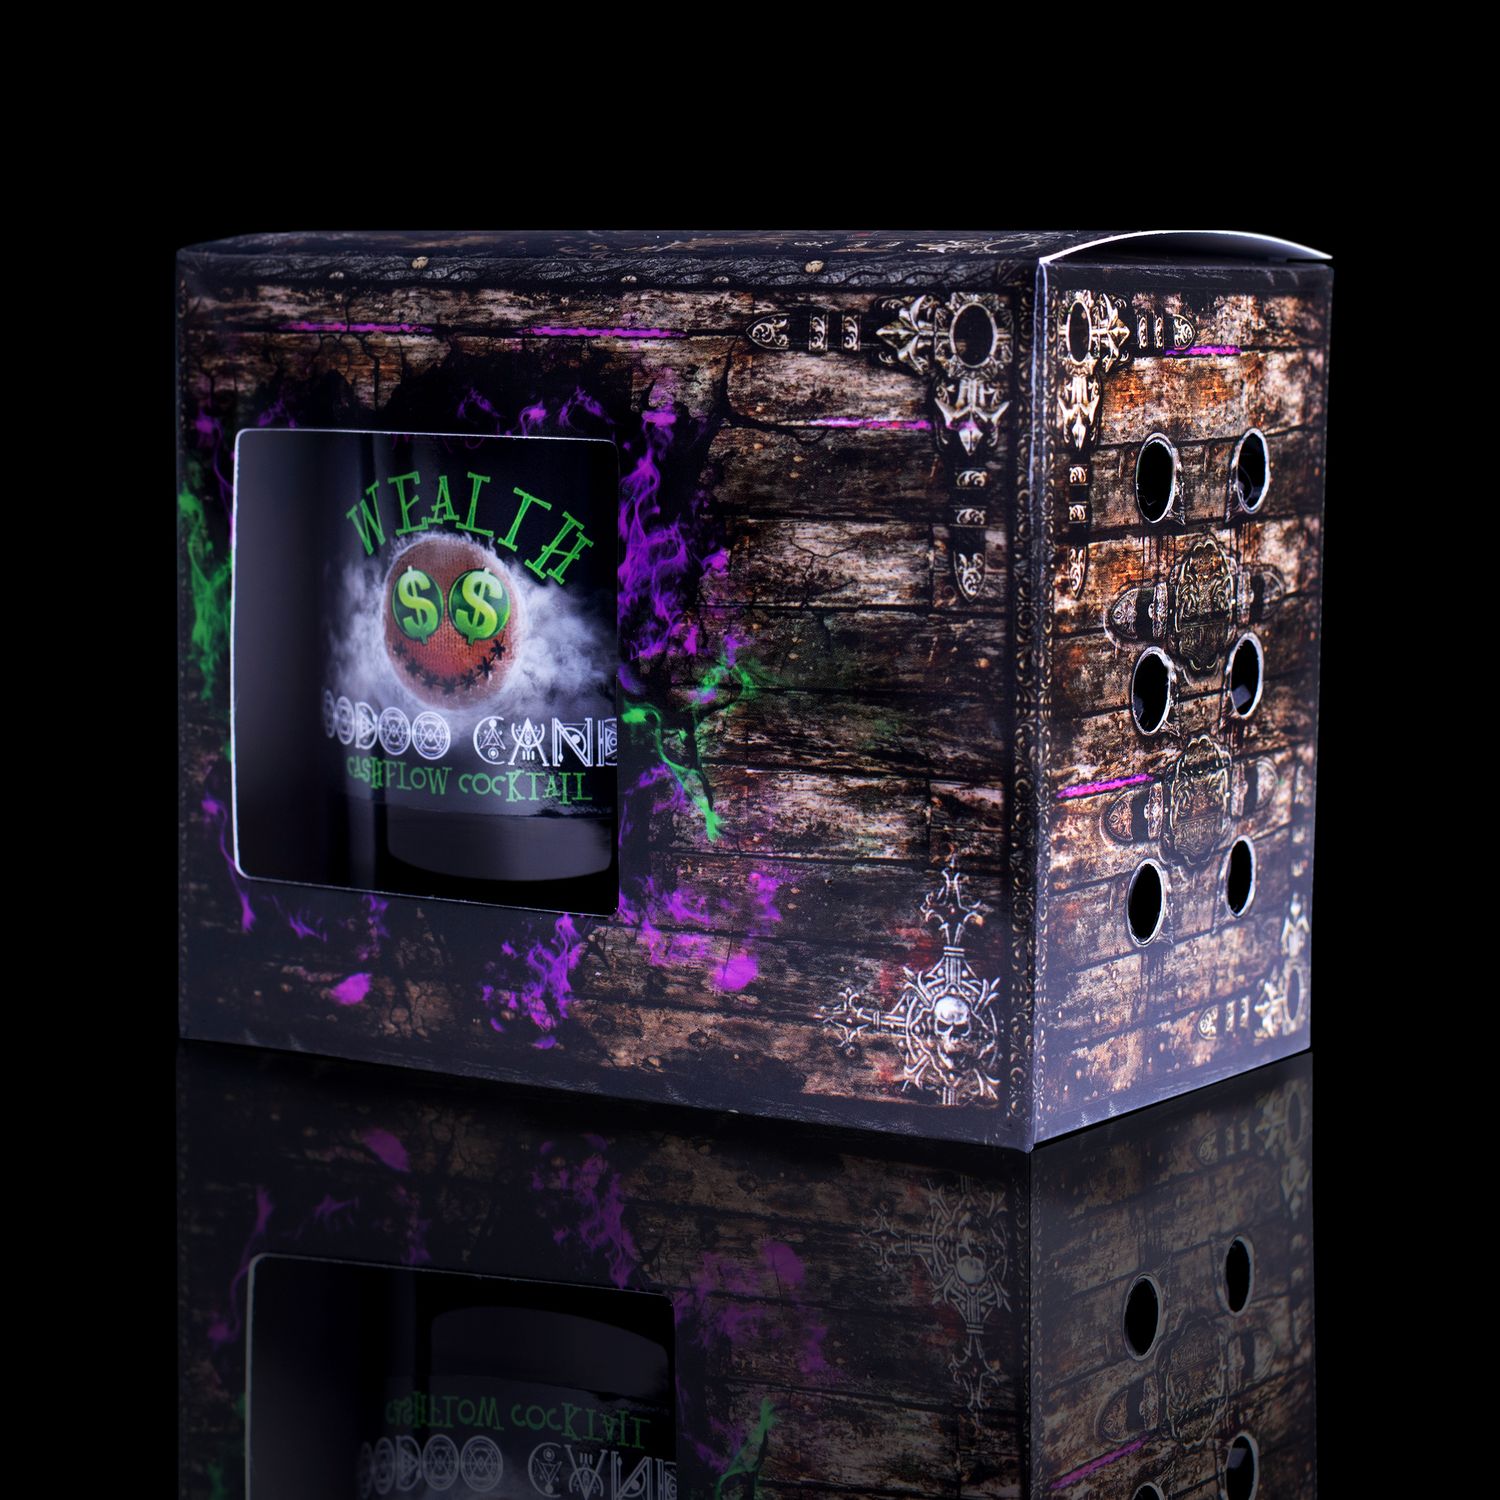 Side View Of The Fabulously Haunting Voodoo Wealth Spell Candle. Naturally Wicked Voodoo Wealth Candle Displayed In A Gift Box. The Candle Features Plant-Based Smooth Green Wax, A Wood Wick, Green Voodoo Doll And A Beautiful Green Aventurine Crystal Wand.